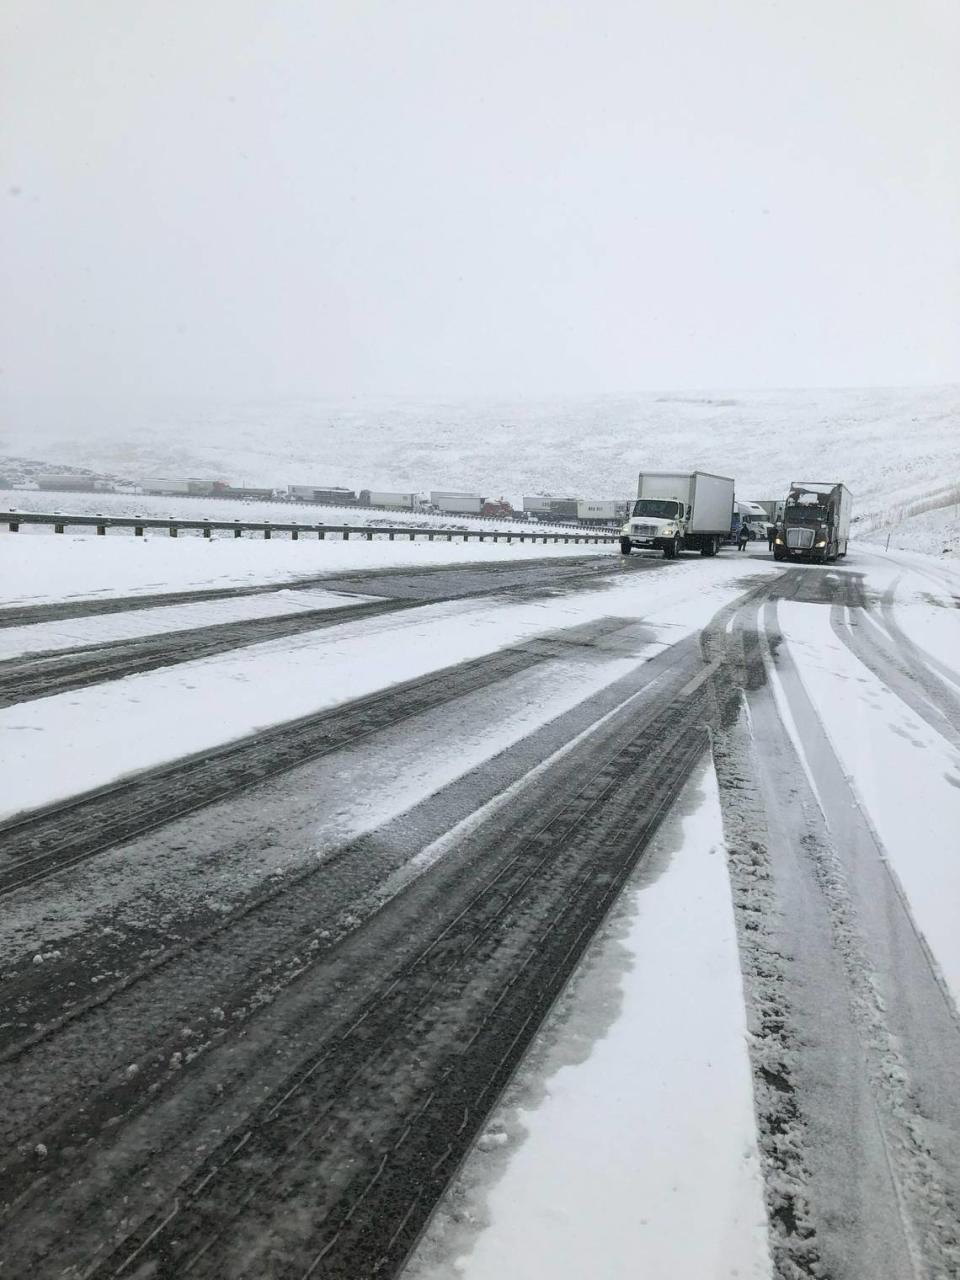 Interstate 84 was closed through Eastern Oregon Thursday after unchained trucks blocked lanes on Cabbage Hill just east of Pendleton.